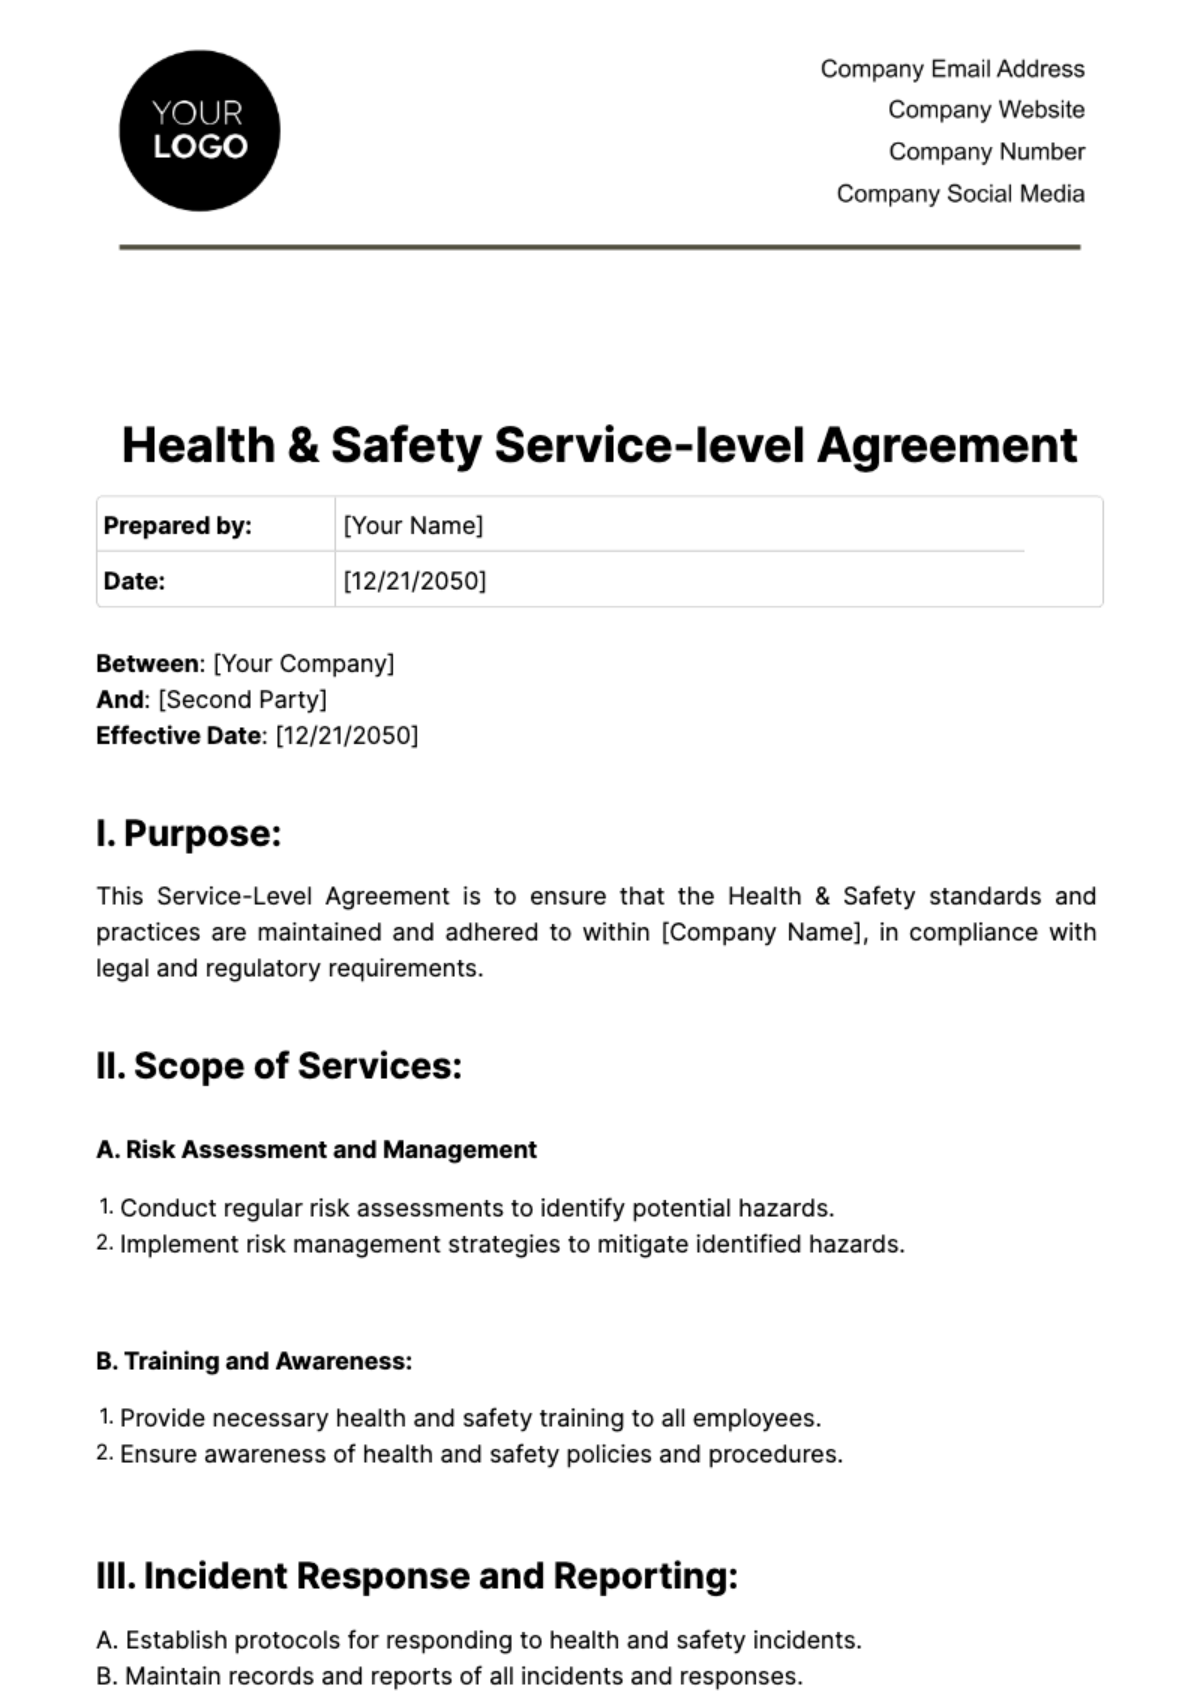 Free Health & Safety Service-level Agreement Template